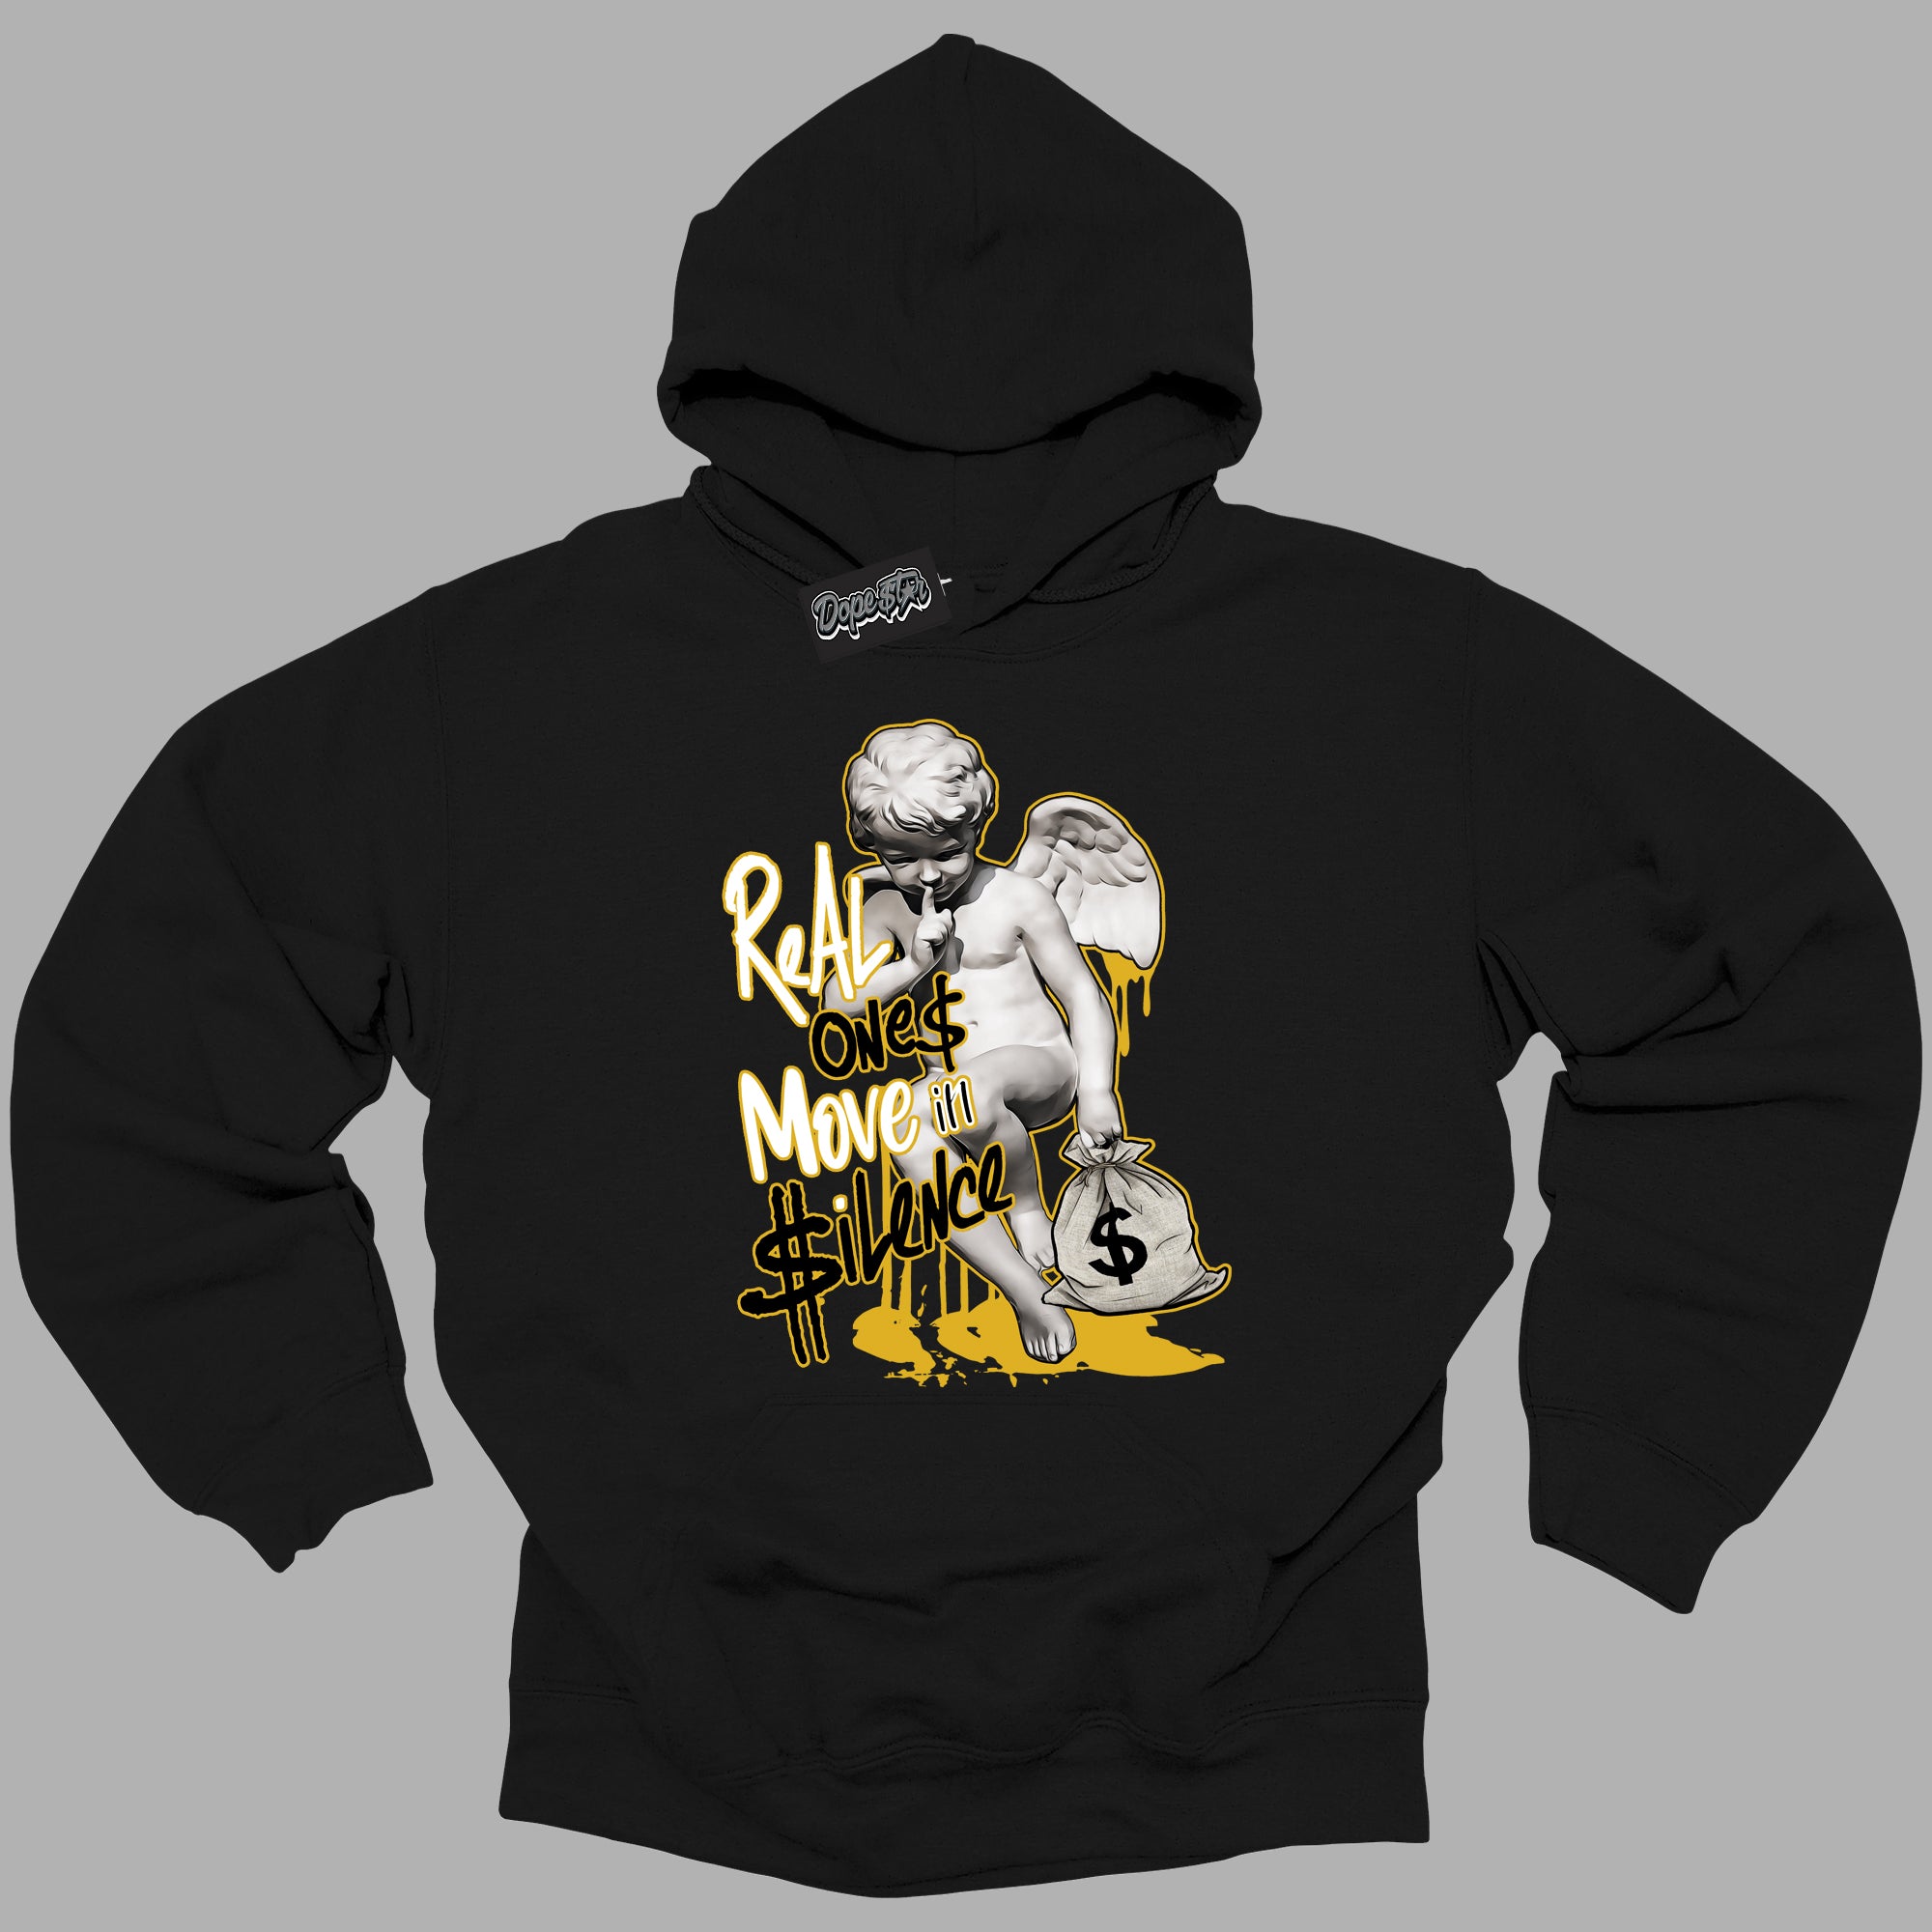 Cool Black Hoodie with “ Real Ones Cherub ”  design that Perfectly Matches Yellow Ochre 6s Sneakers.